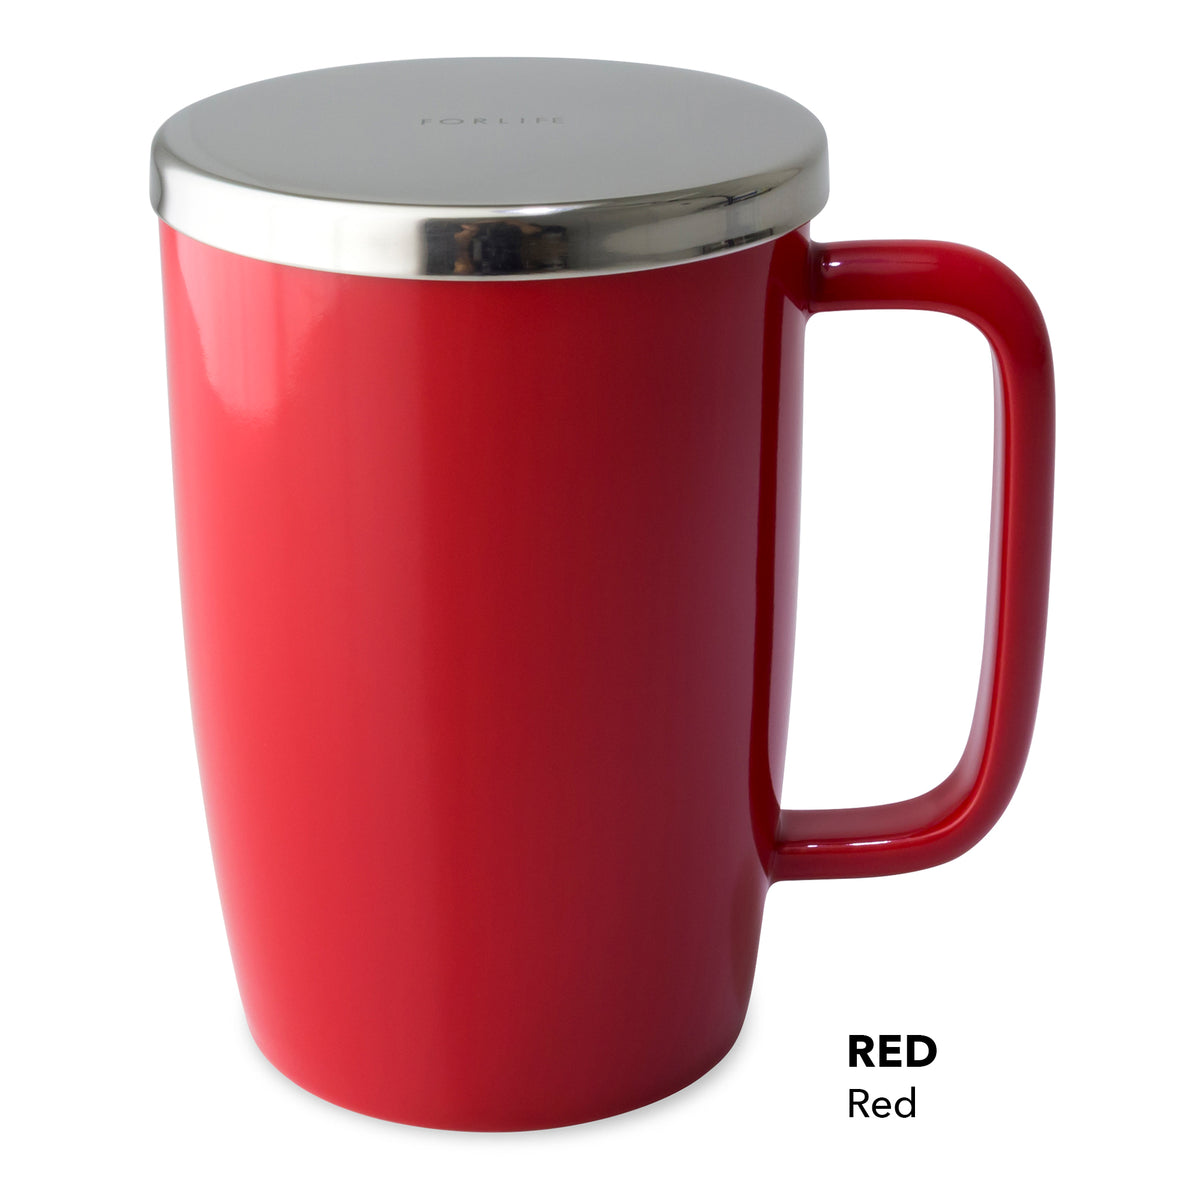 FORLIFE Mug With Basket Infuser and Stainless Steel Lid : Glossy Red